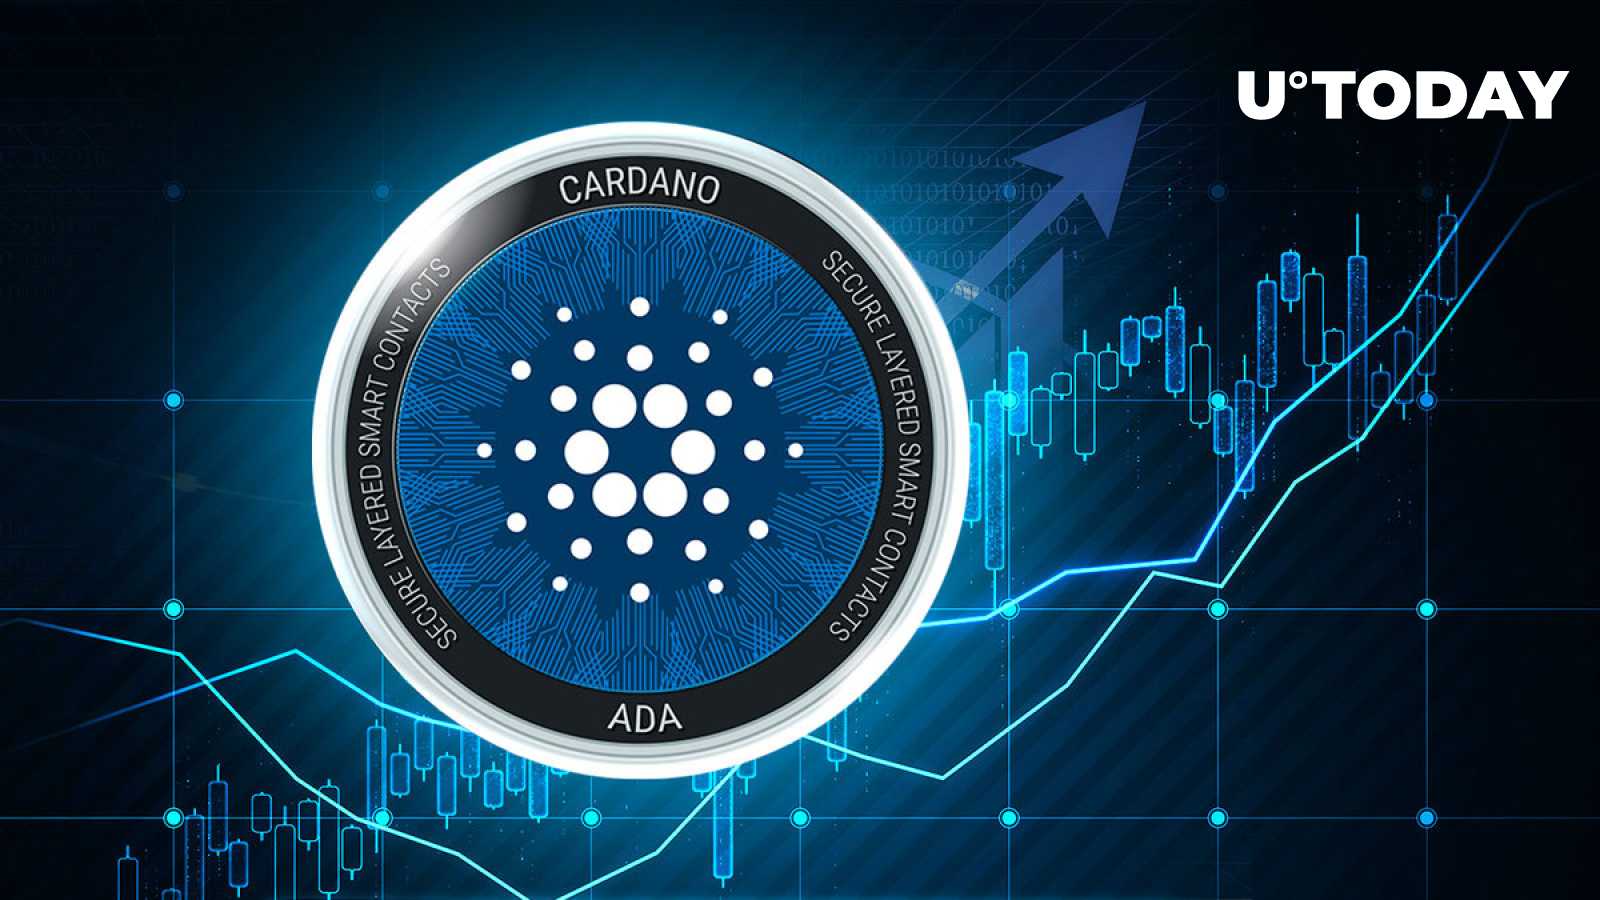 Cardano (ADA) Price Eyes 36% Growth in February, If Price History Is Right